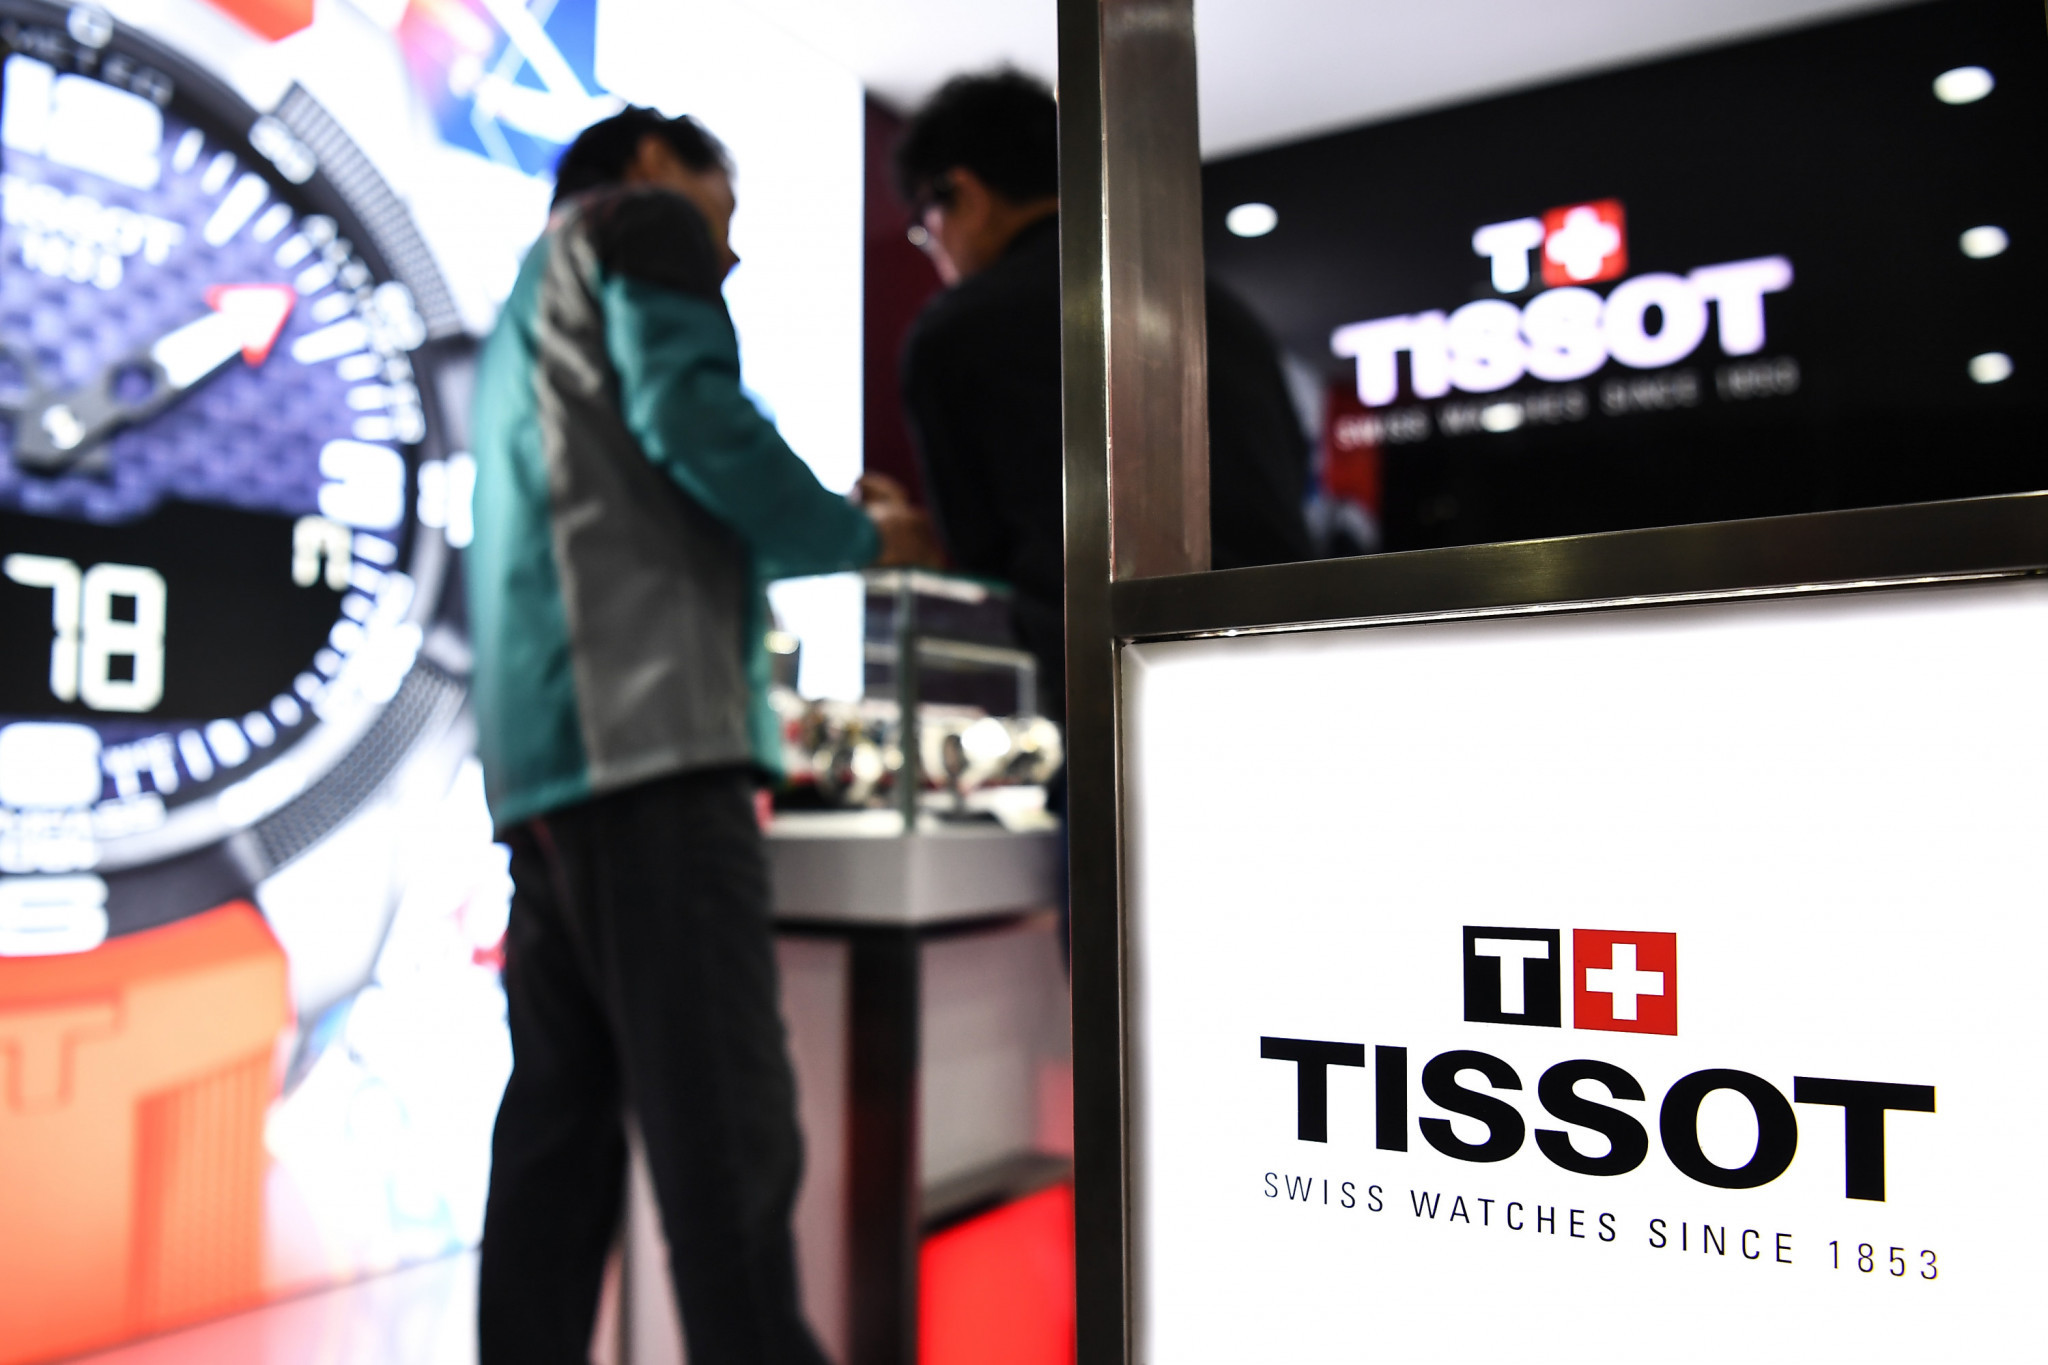 Tissot has been named as a gold partner of the Lucerne 2021 Winter Universiade ©Getty Images